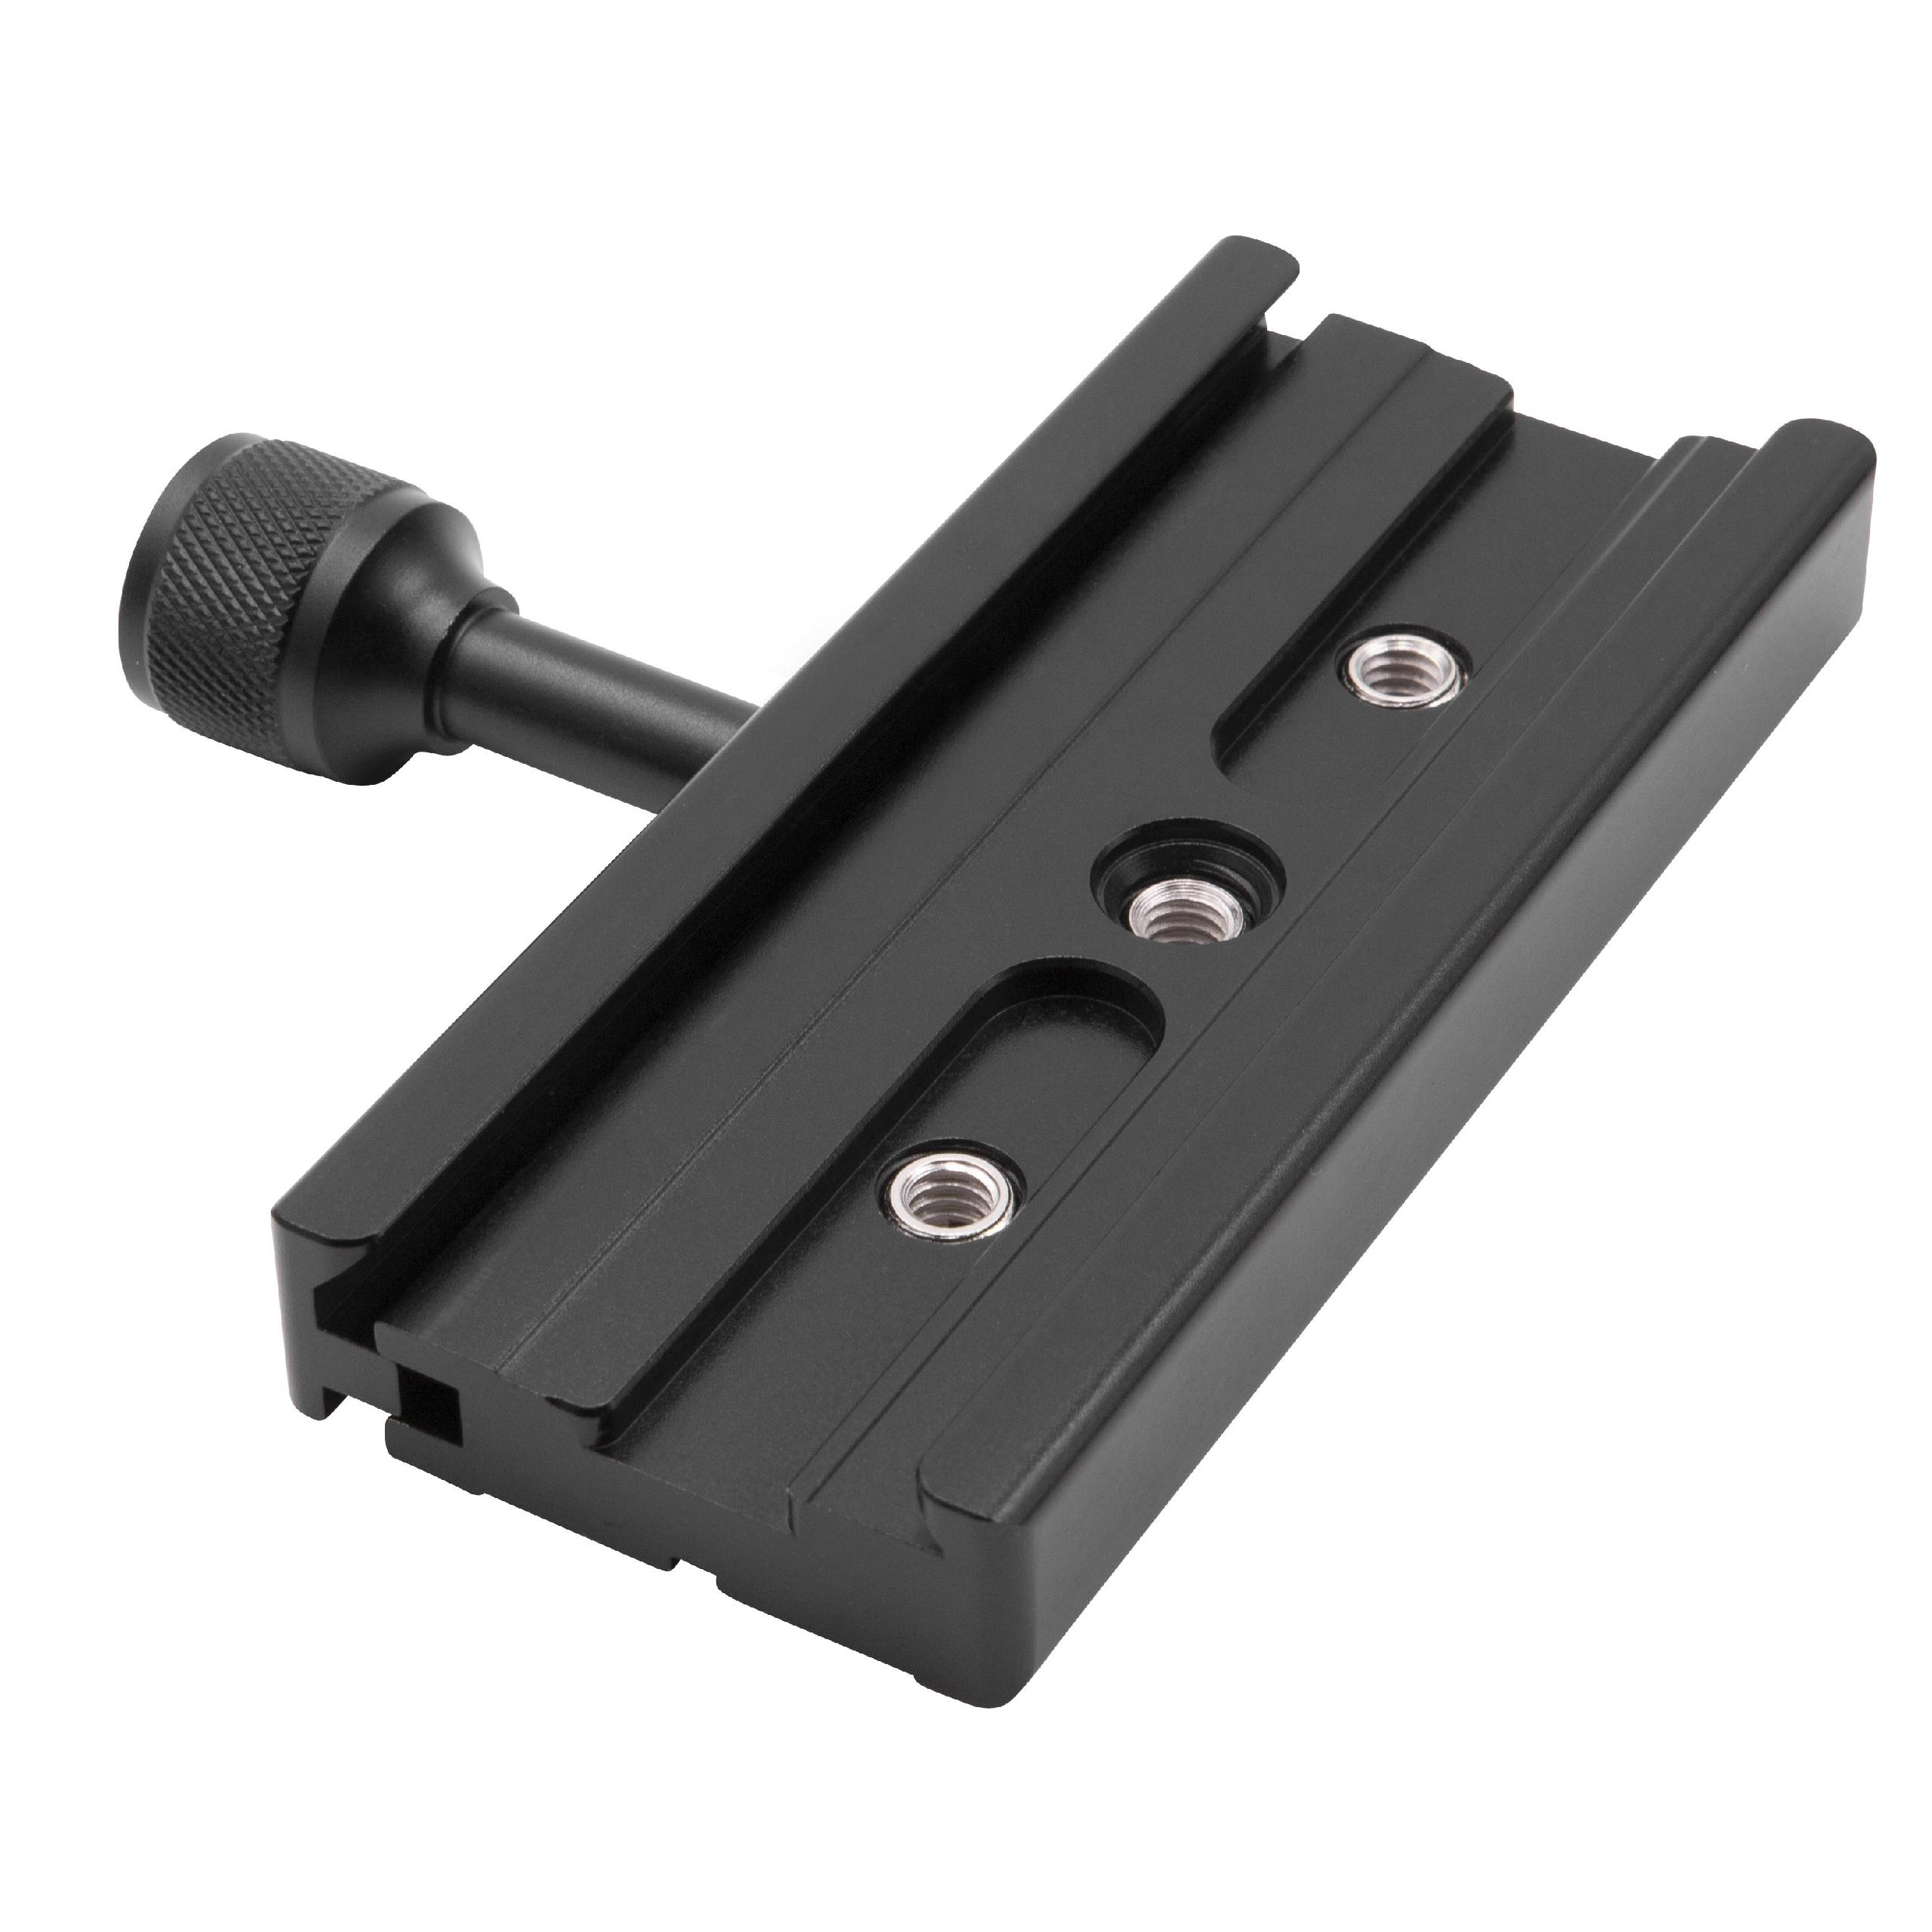 vhbw Quick-Release Clamp Type CL-120 compatible with Arca Swiss Standard Plates - Holder